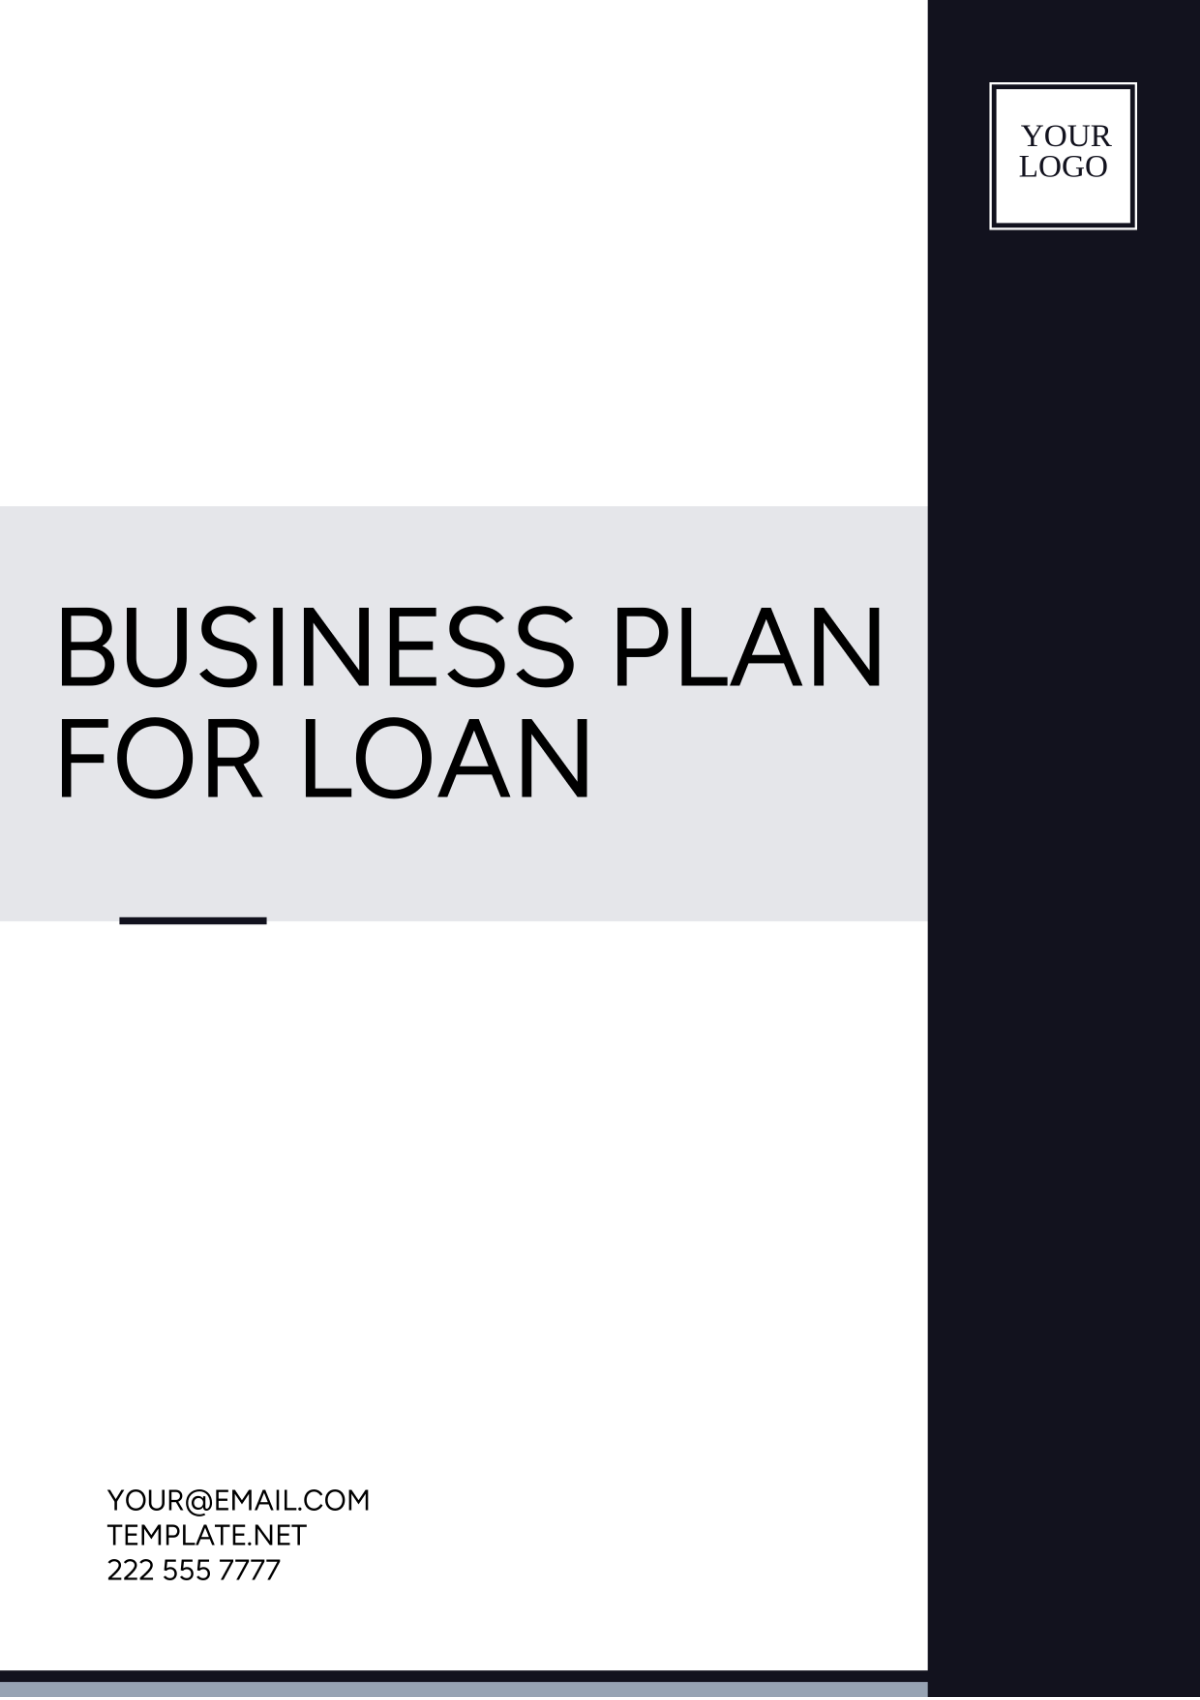 Business Plan for Loan Template